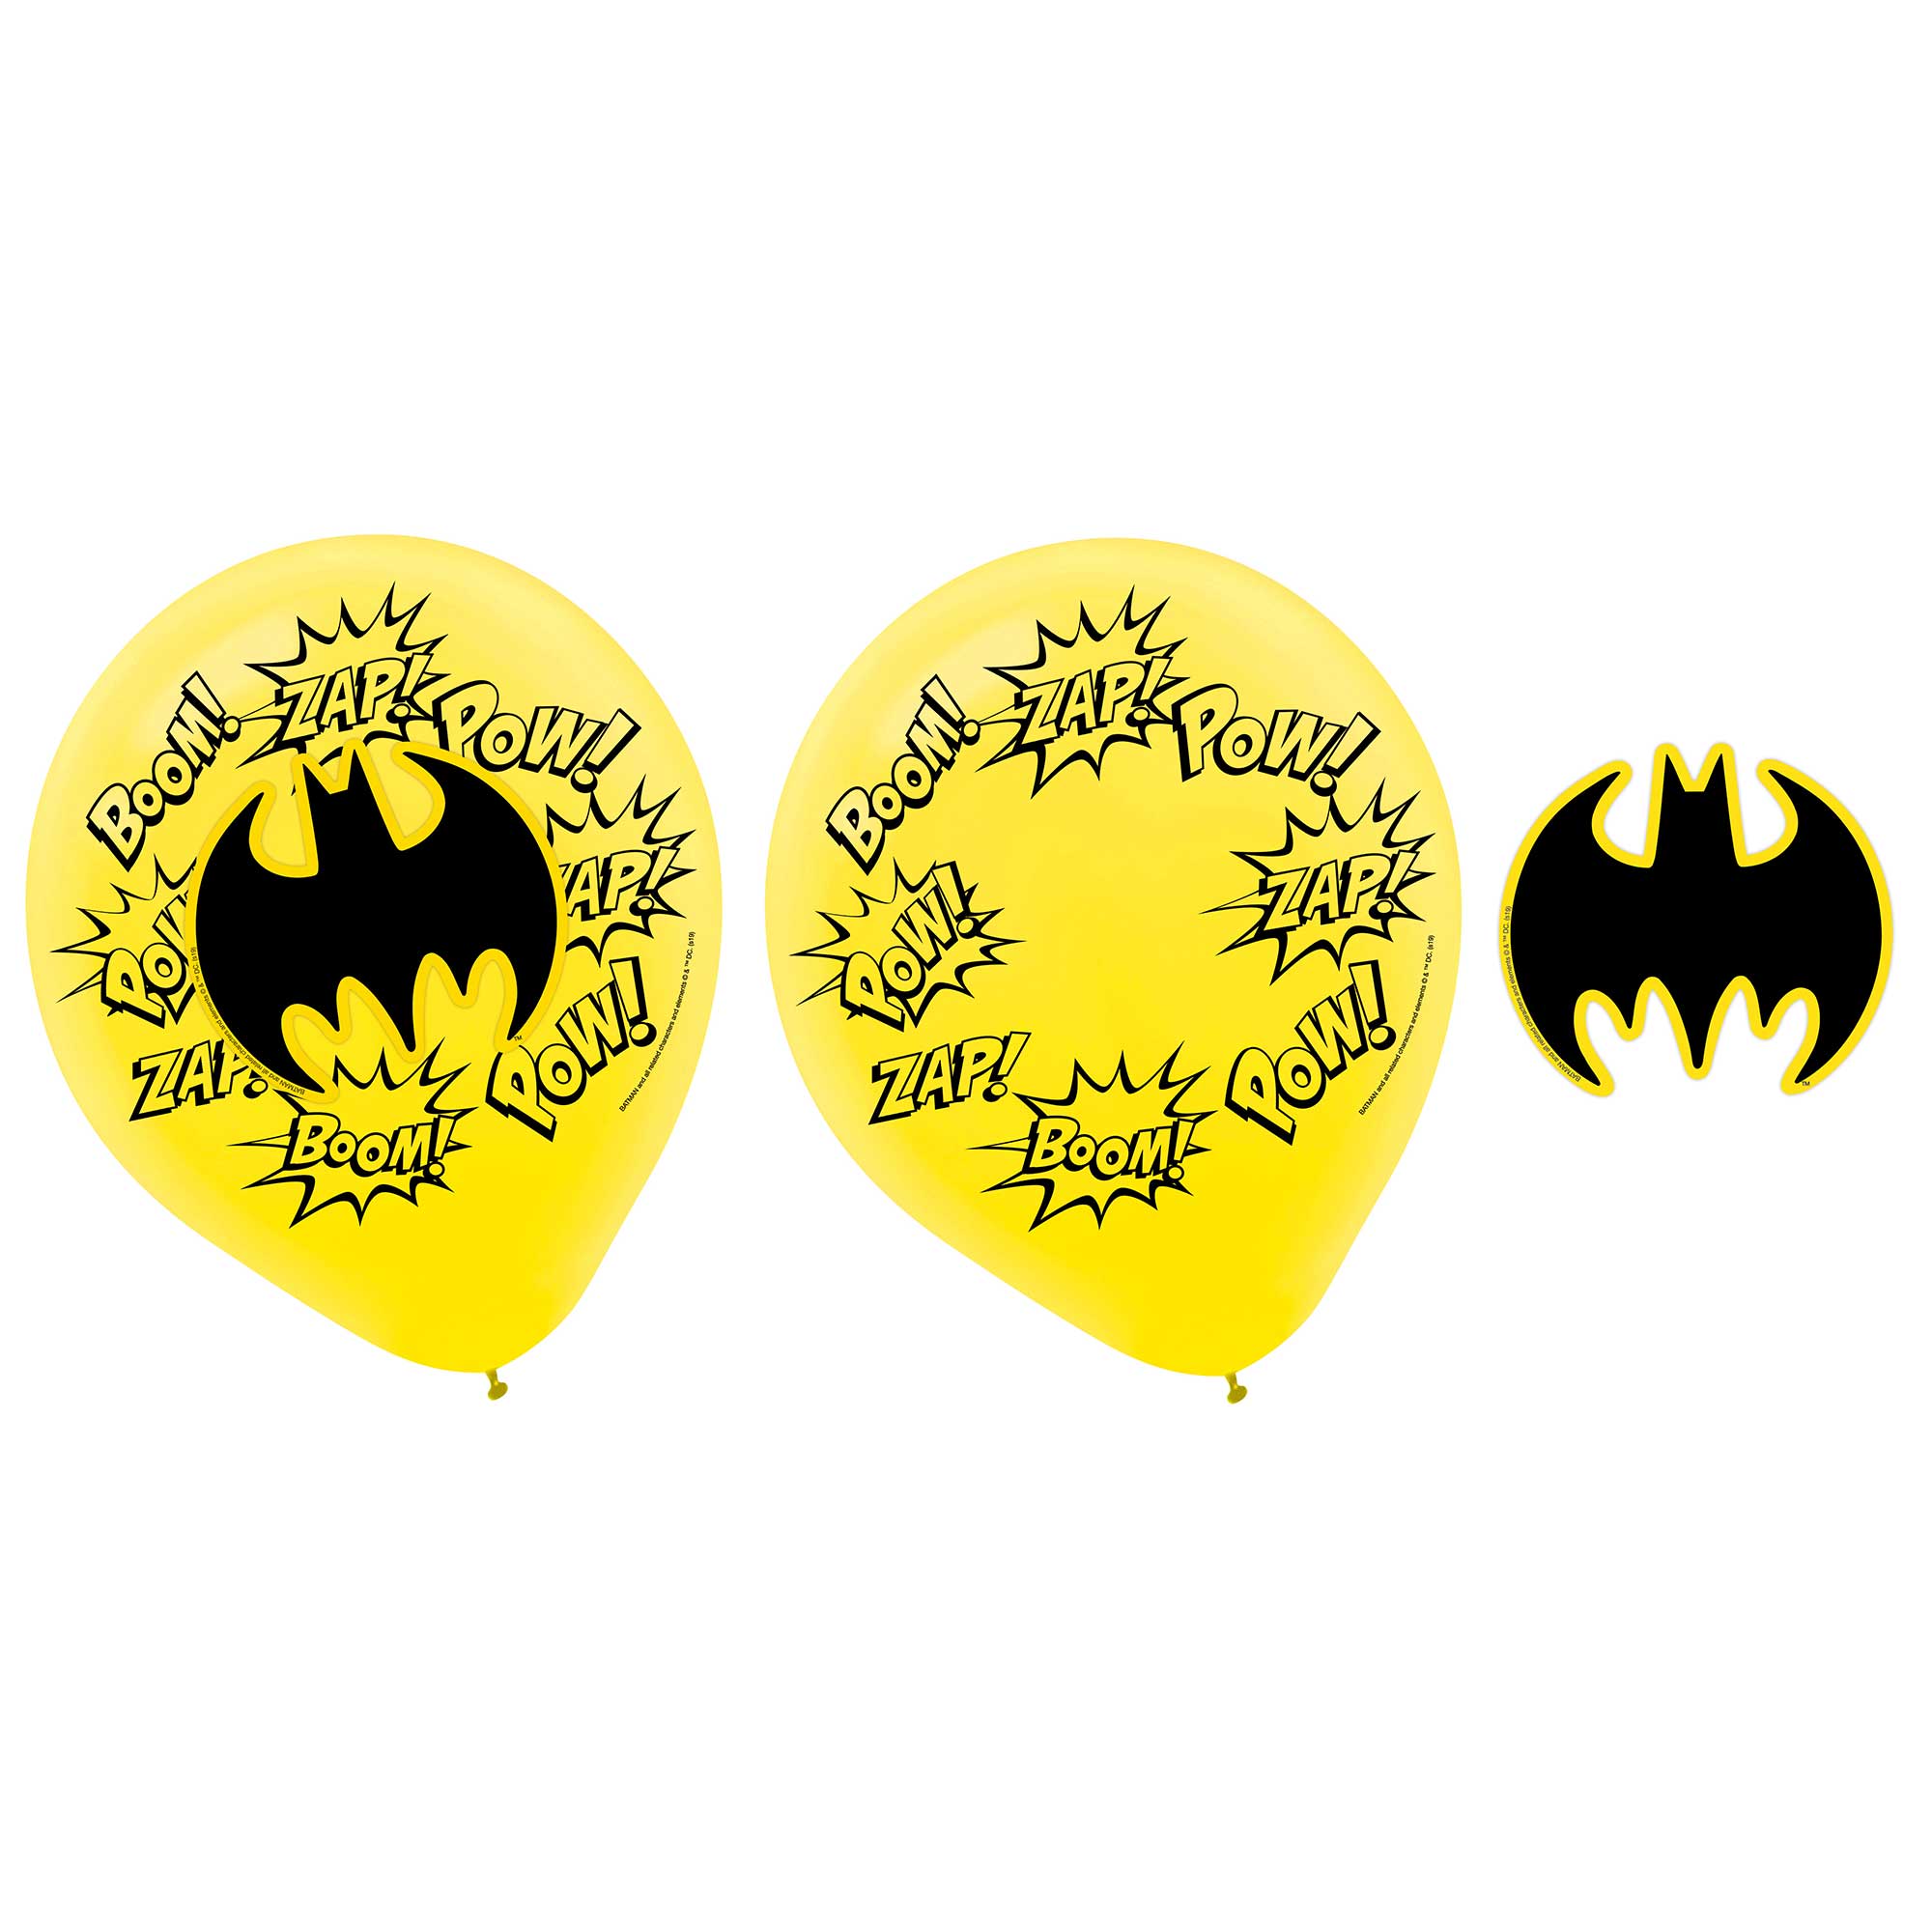 Batman Heroes Unite Latex Balloons and Paper Adhesive Add-ons - 30cm 6 Pack Default Title